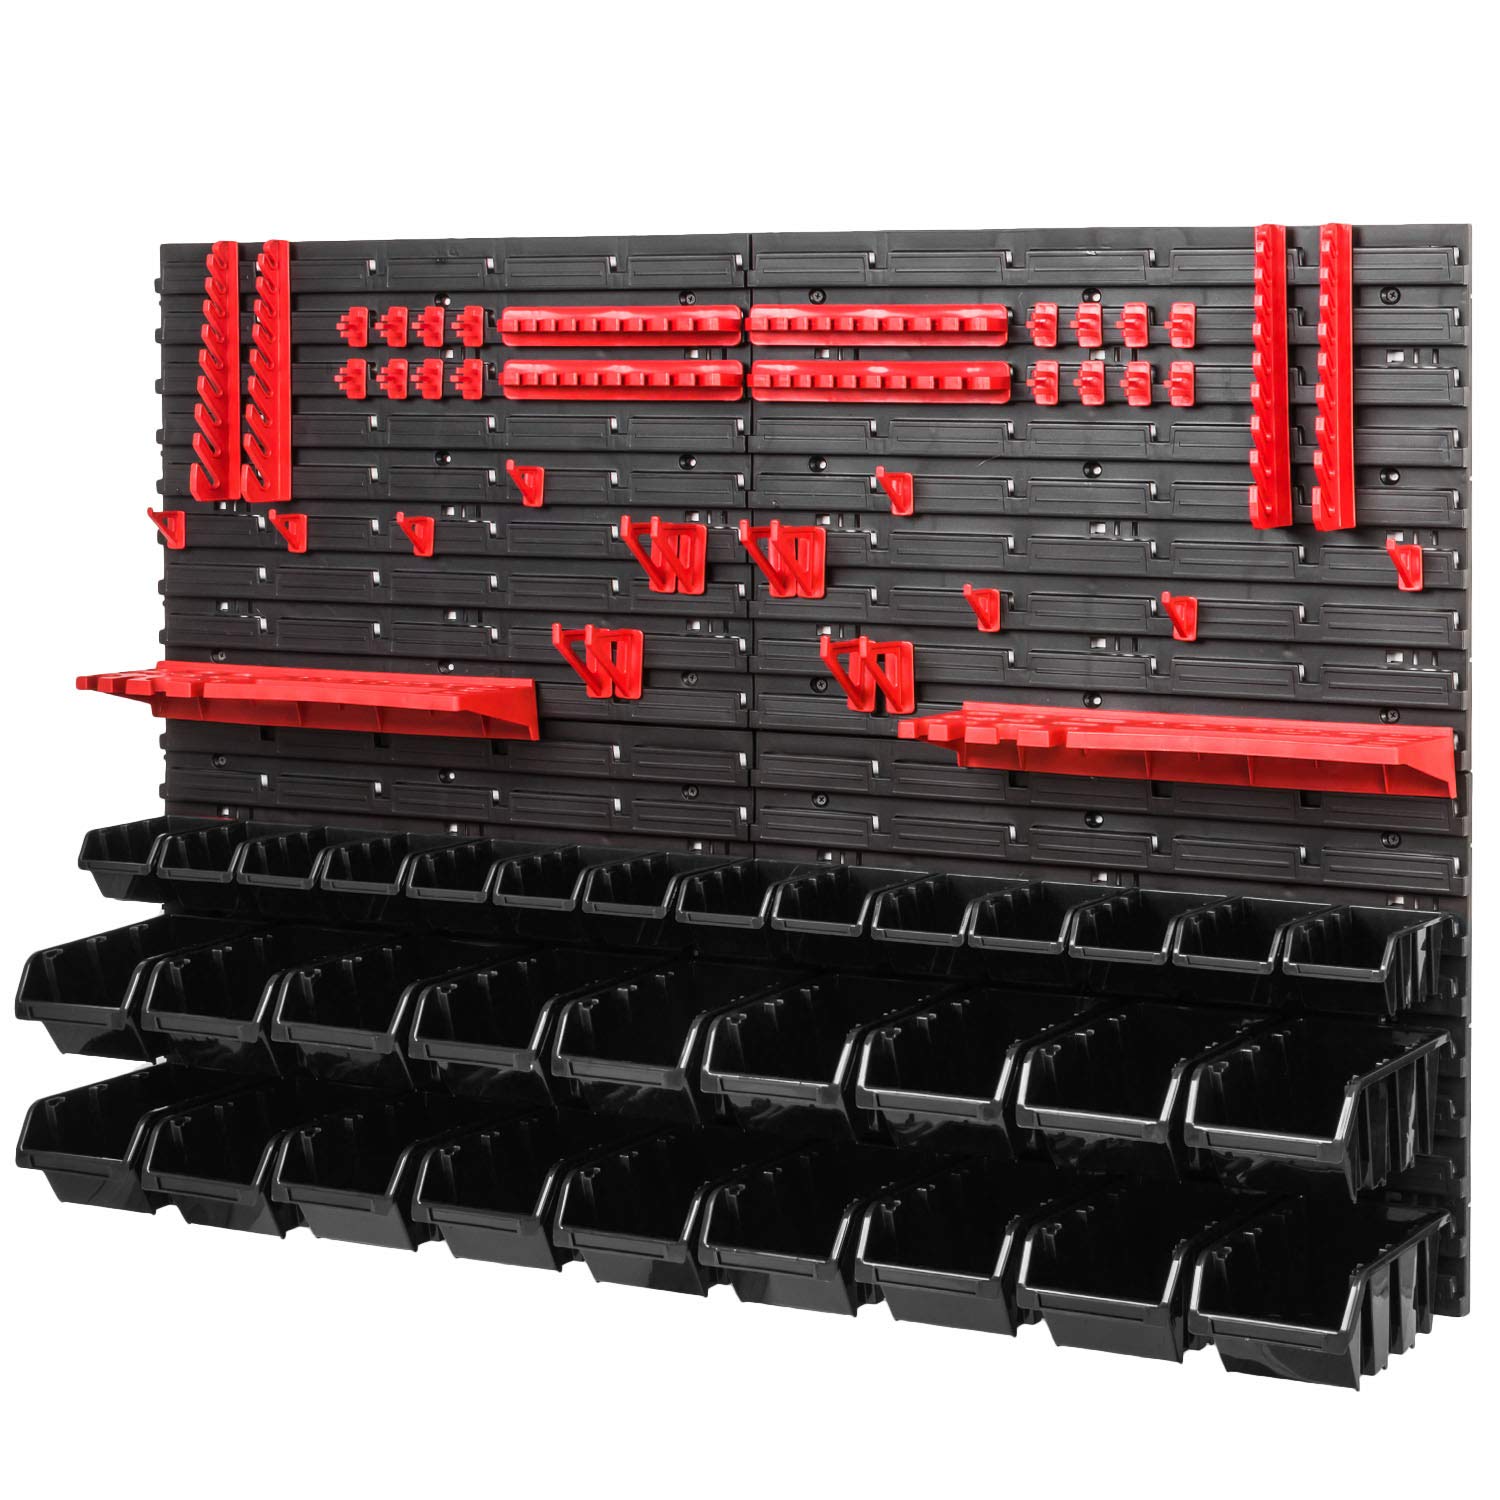 PAFEN Workshop Shelf Storage System - 1152 x 780 mm - Wall Shelf with Black Stacking Boxes, Red Tool Holder - Shed Shelf Wall Plates Extra Strong